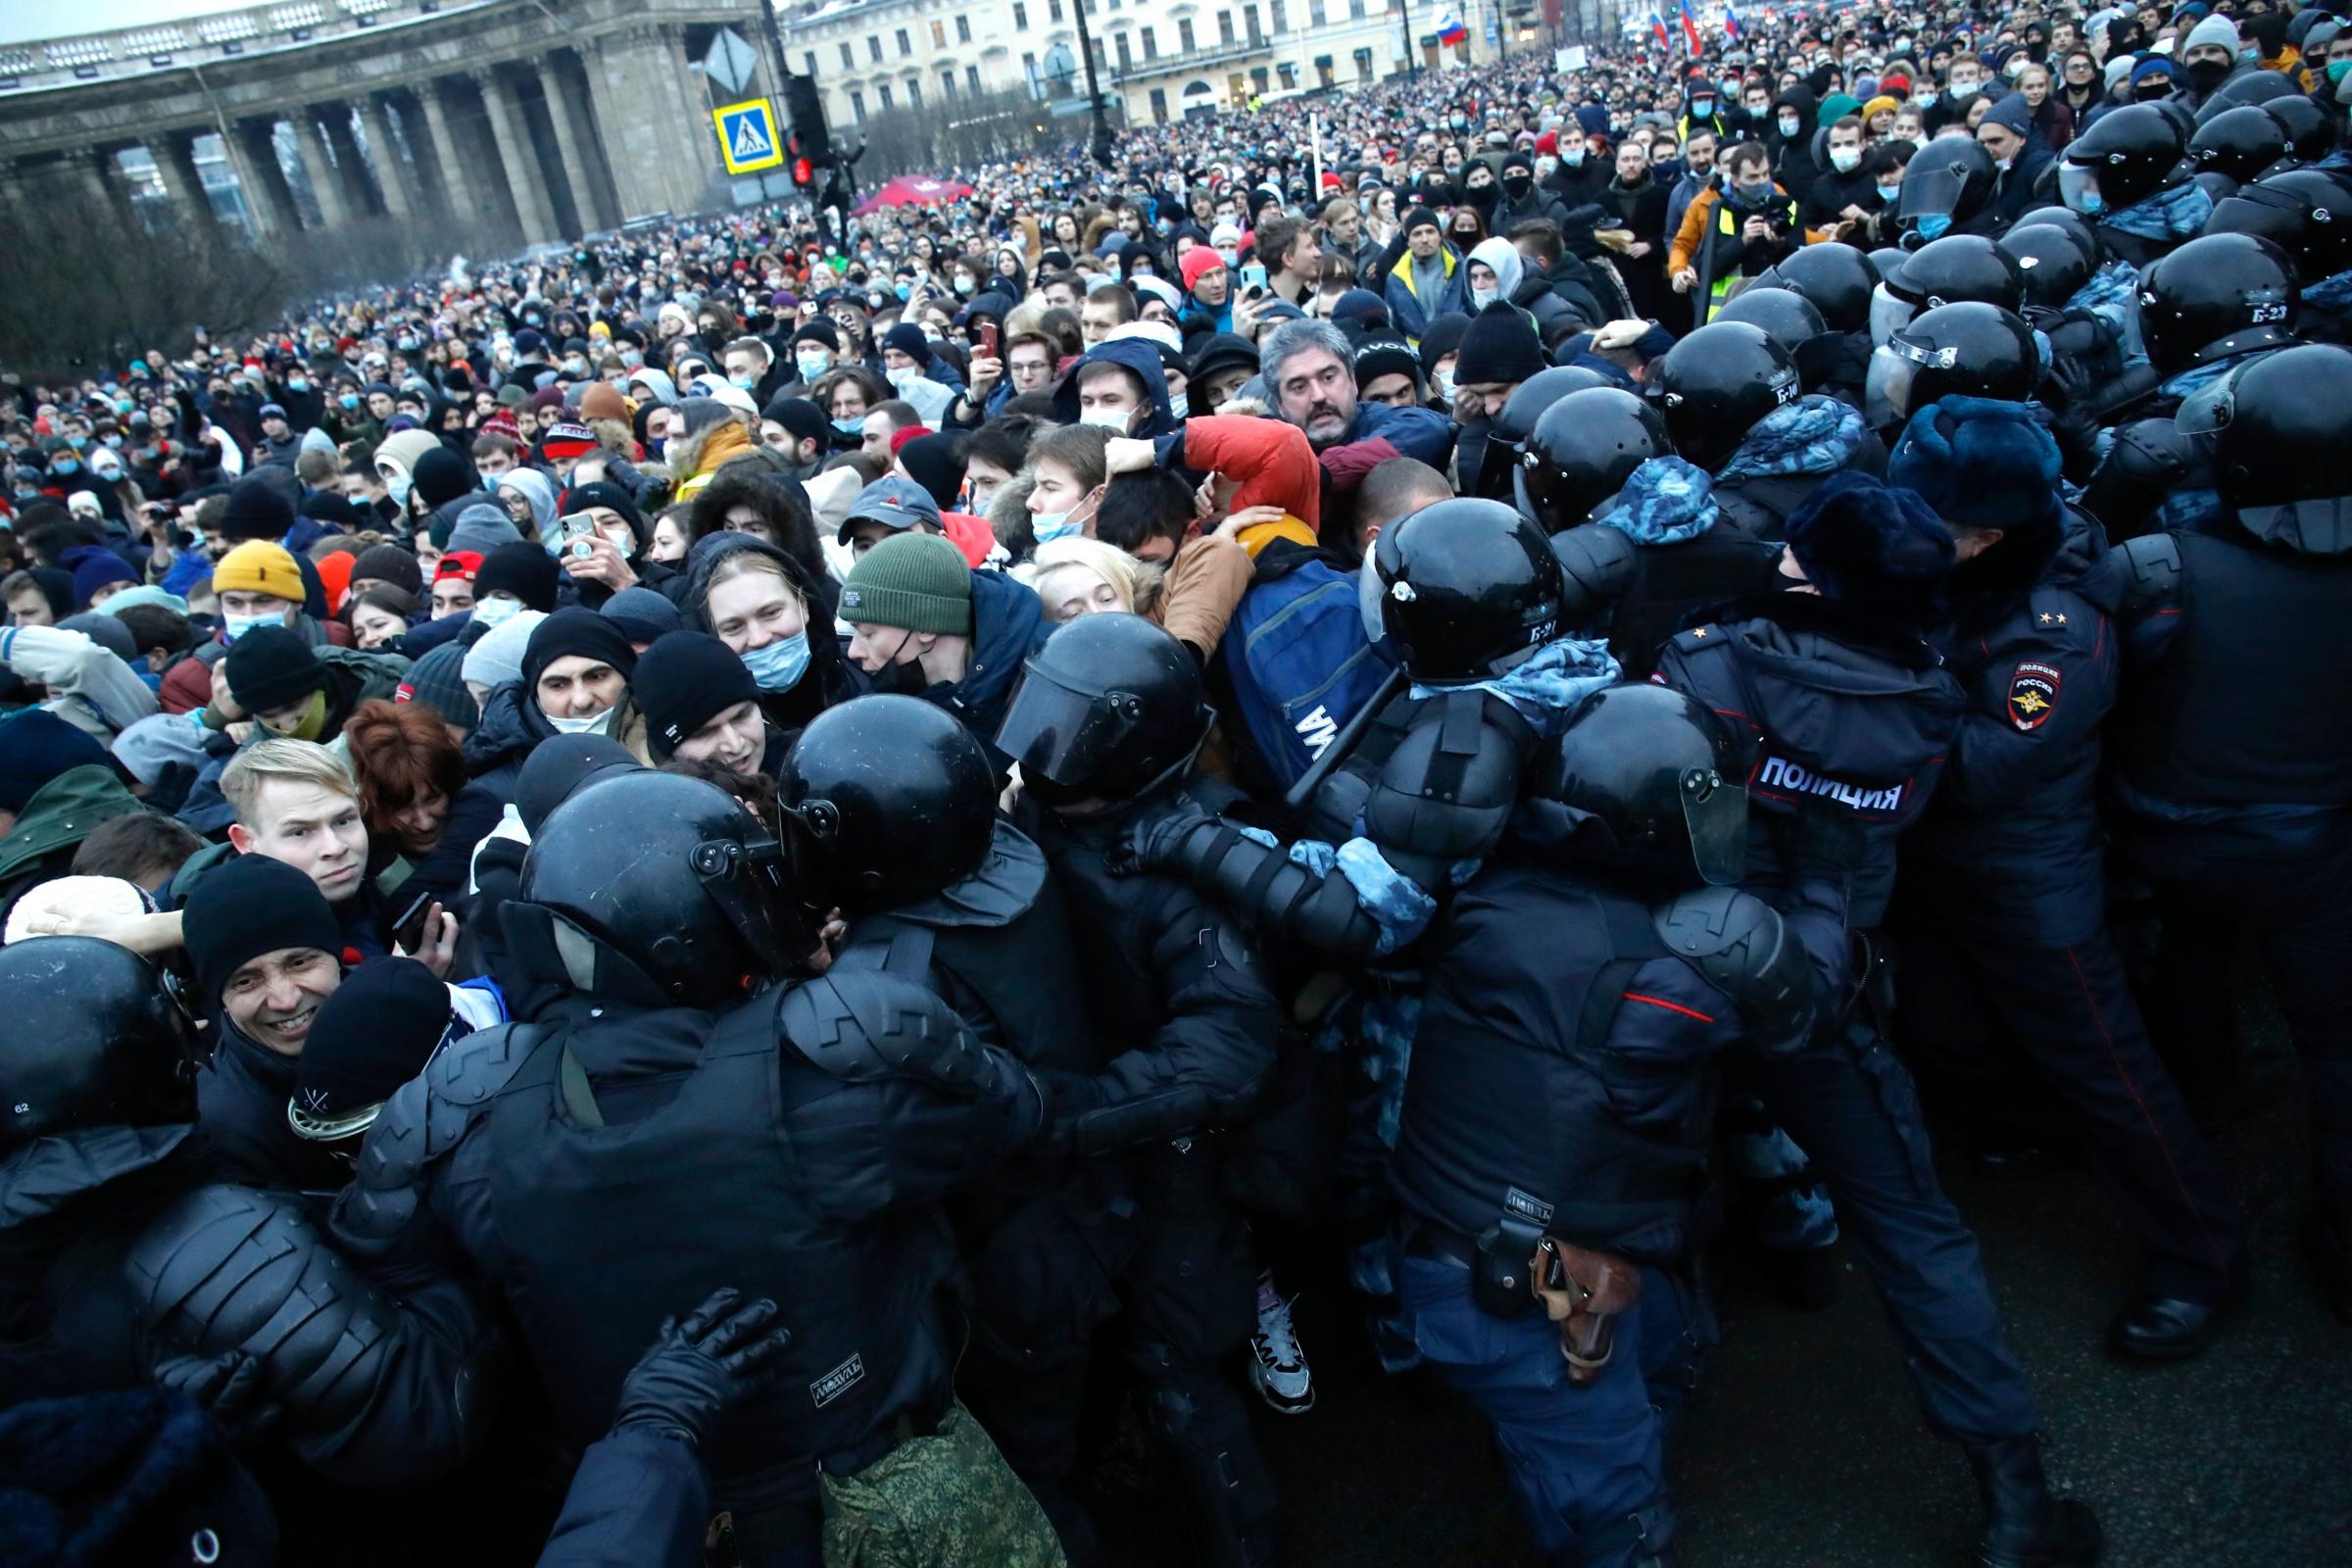 More than 2600 arrested as protesters across Russia demand Navalny's release